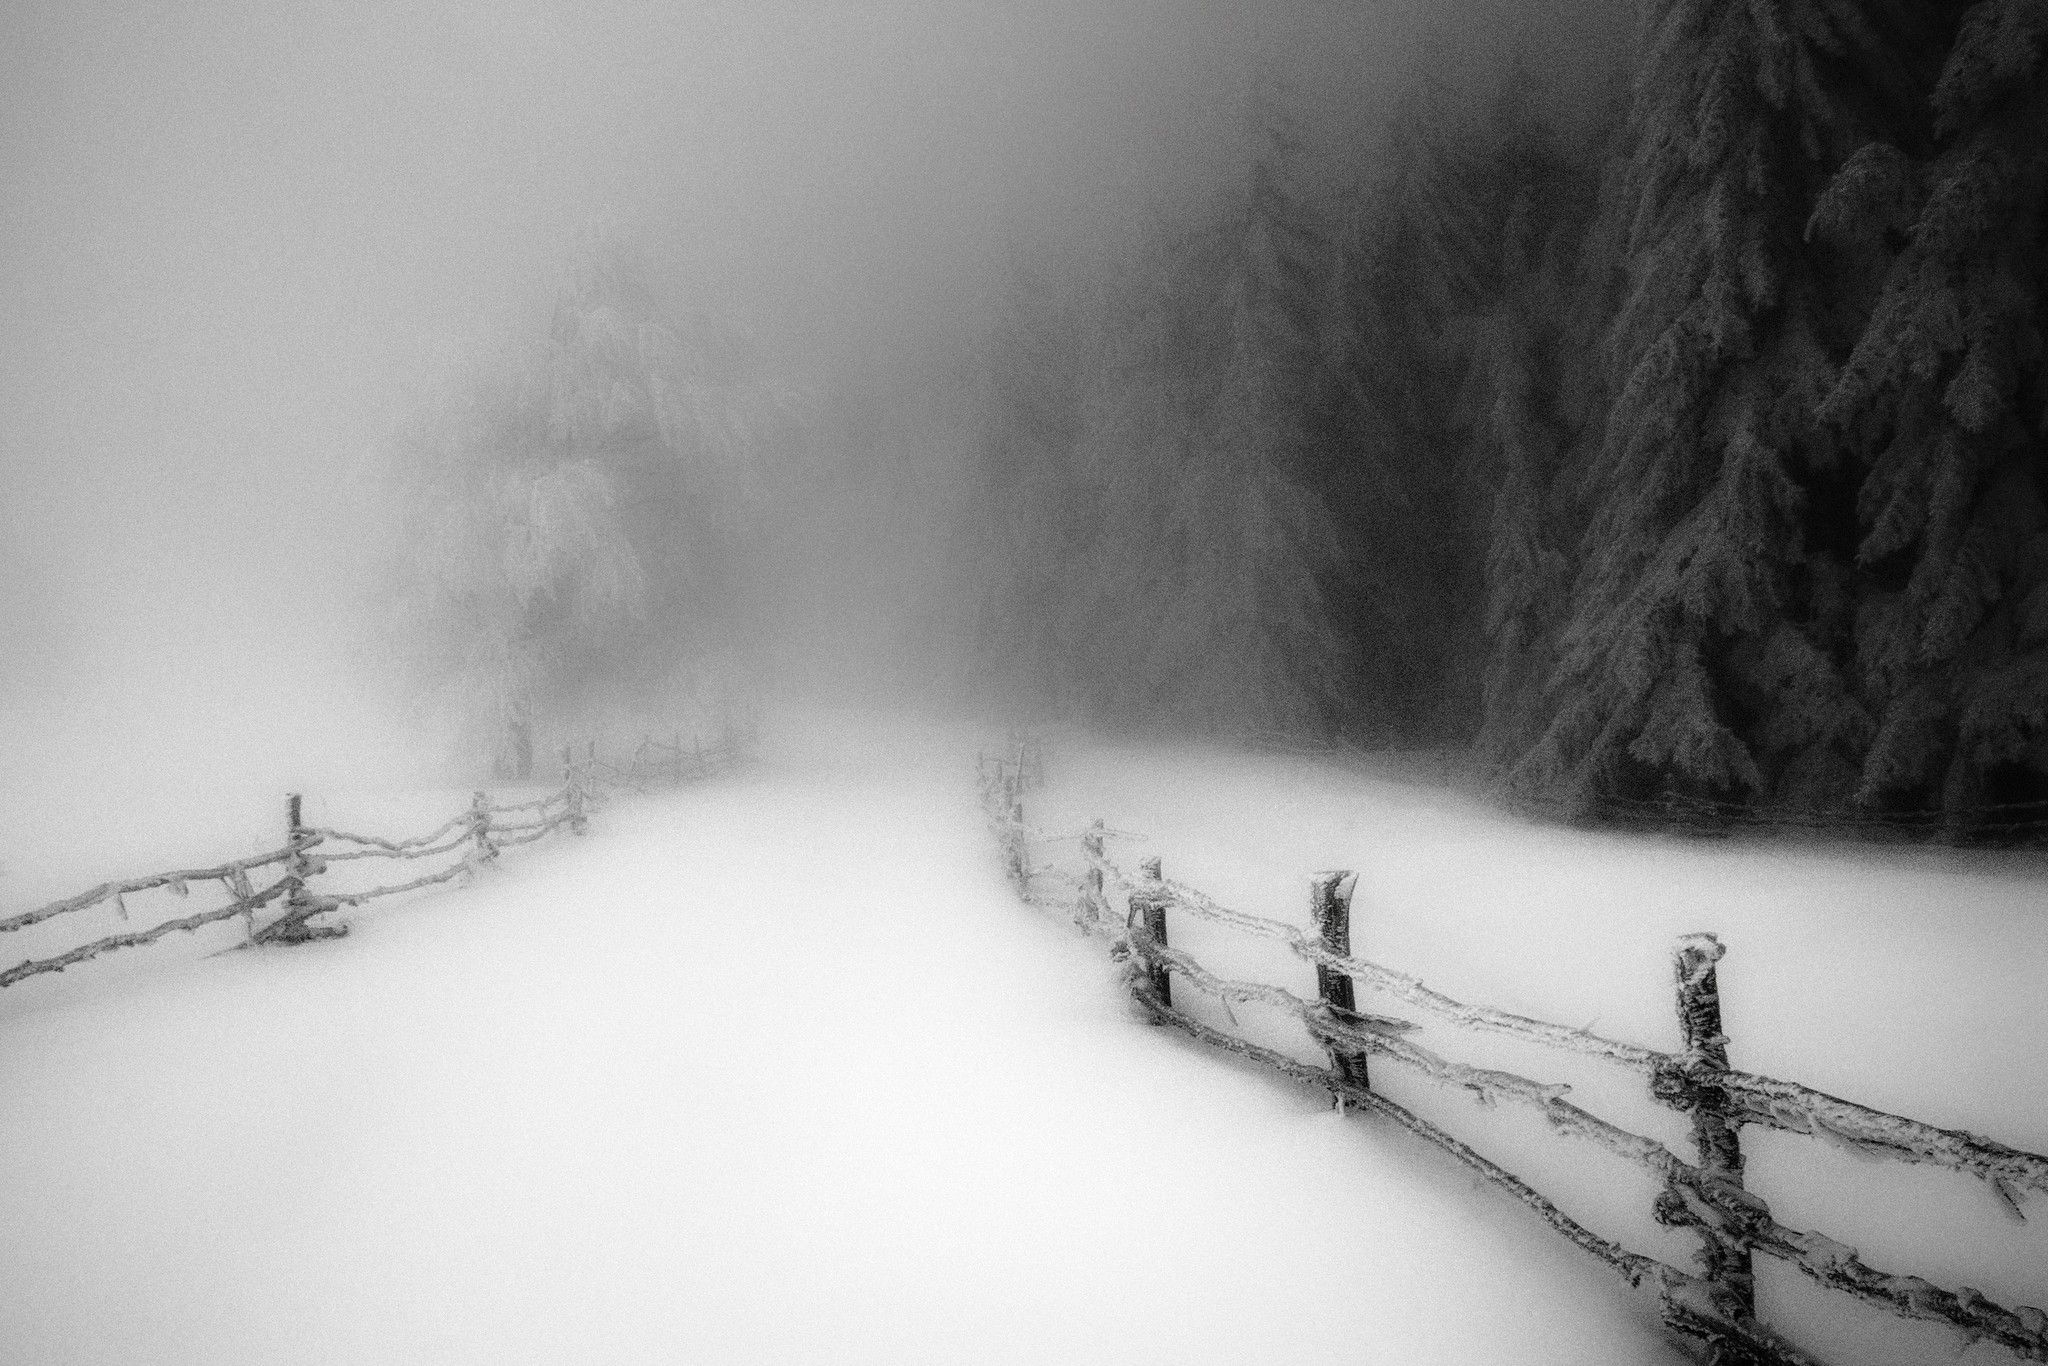 landscape nature winter morning snow forest fence cold monochrome road path trees daylight mist wallpaper